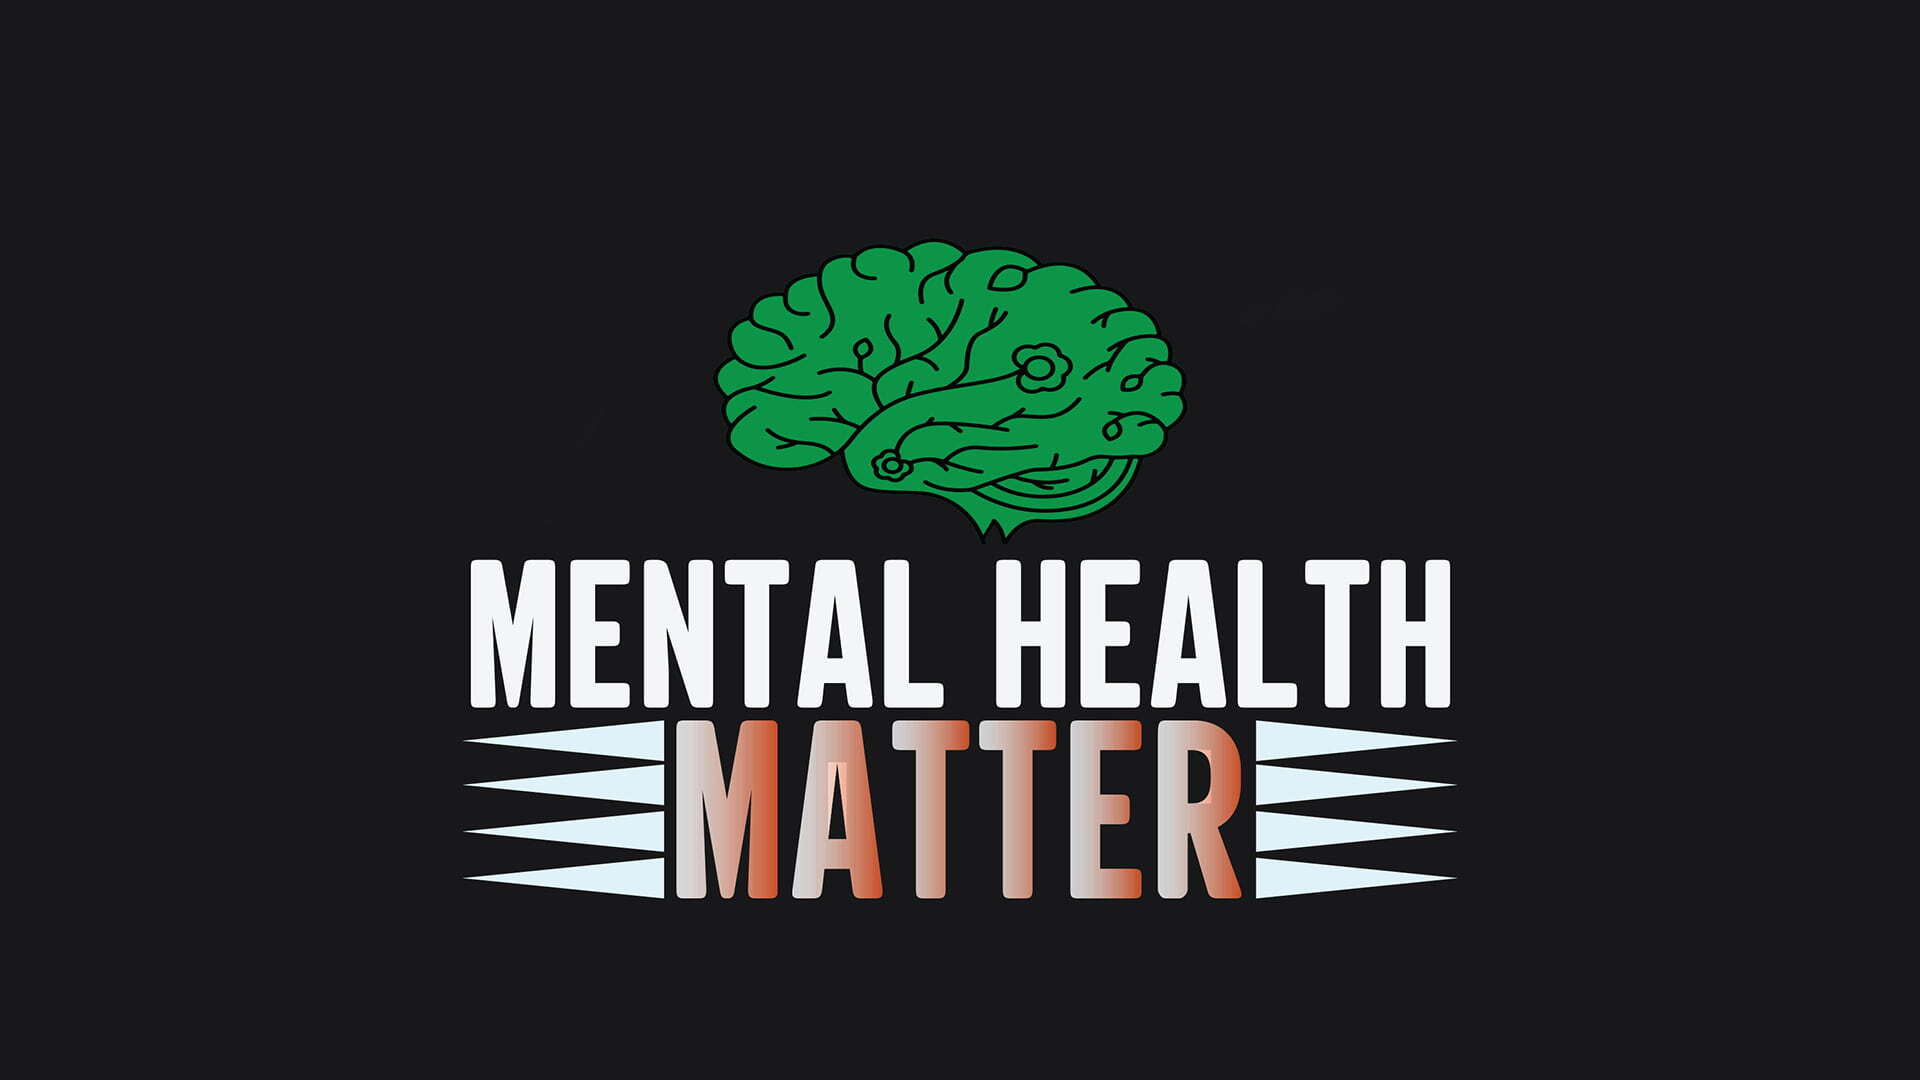 Mental Health Matters, Well-being